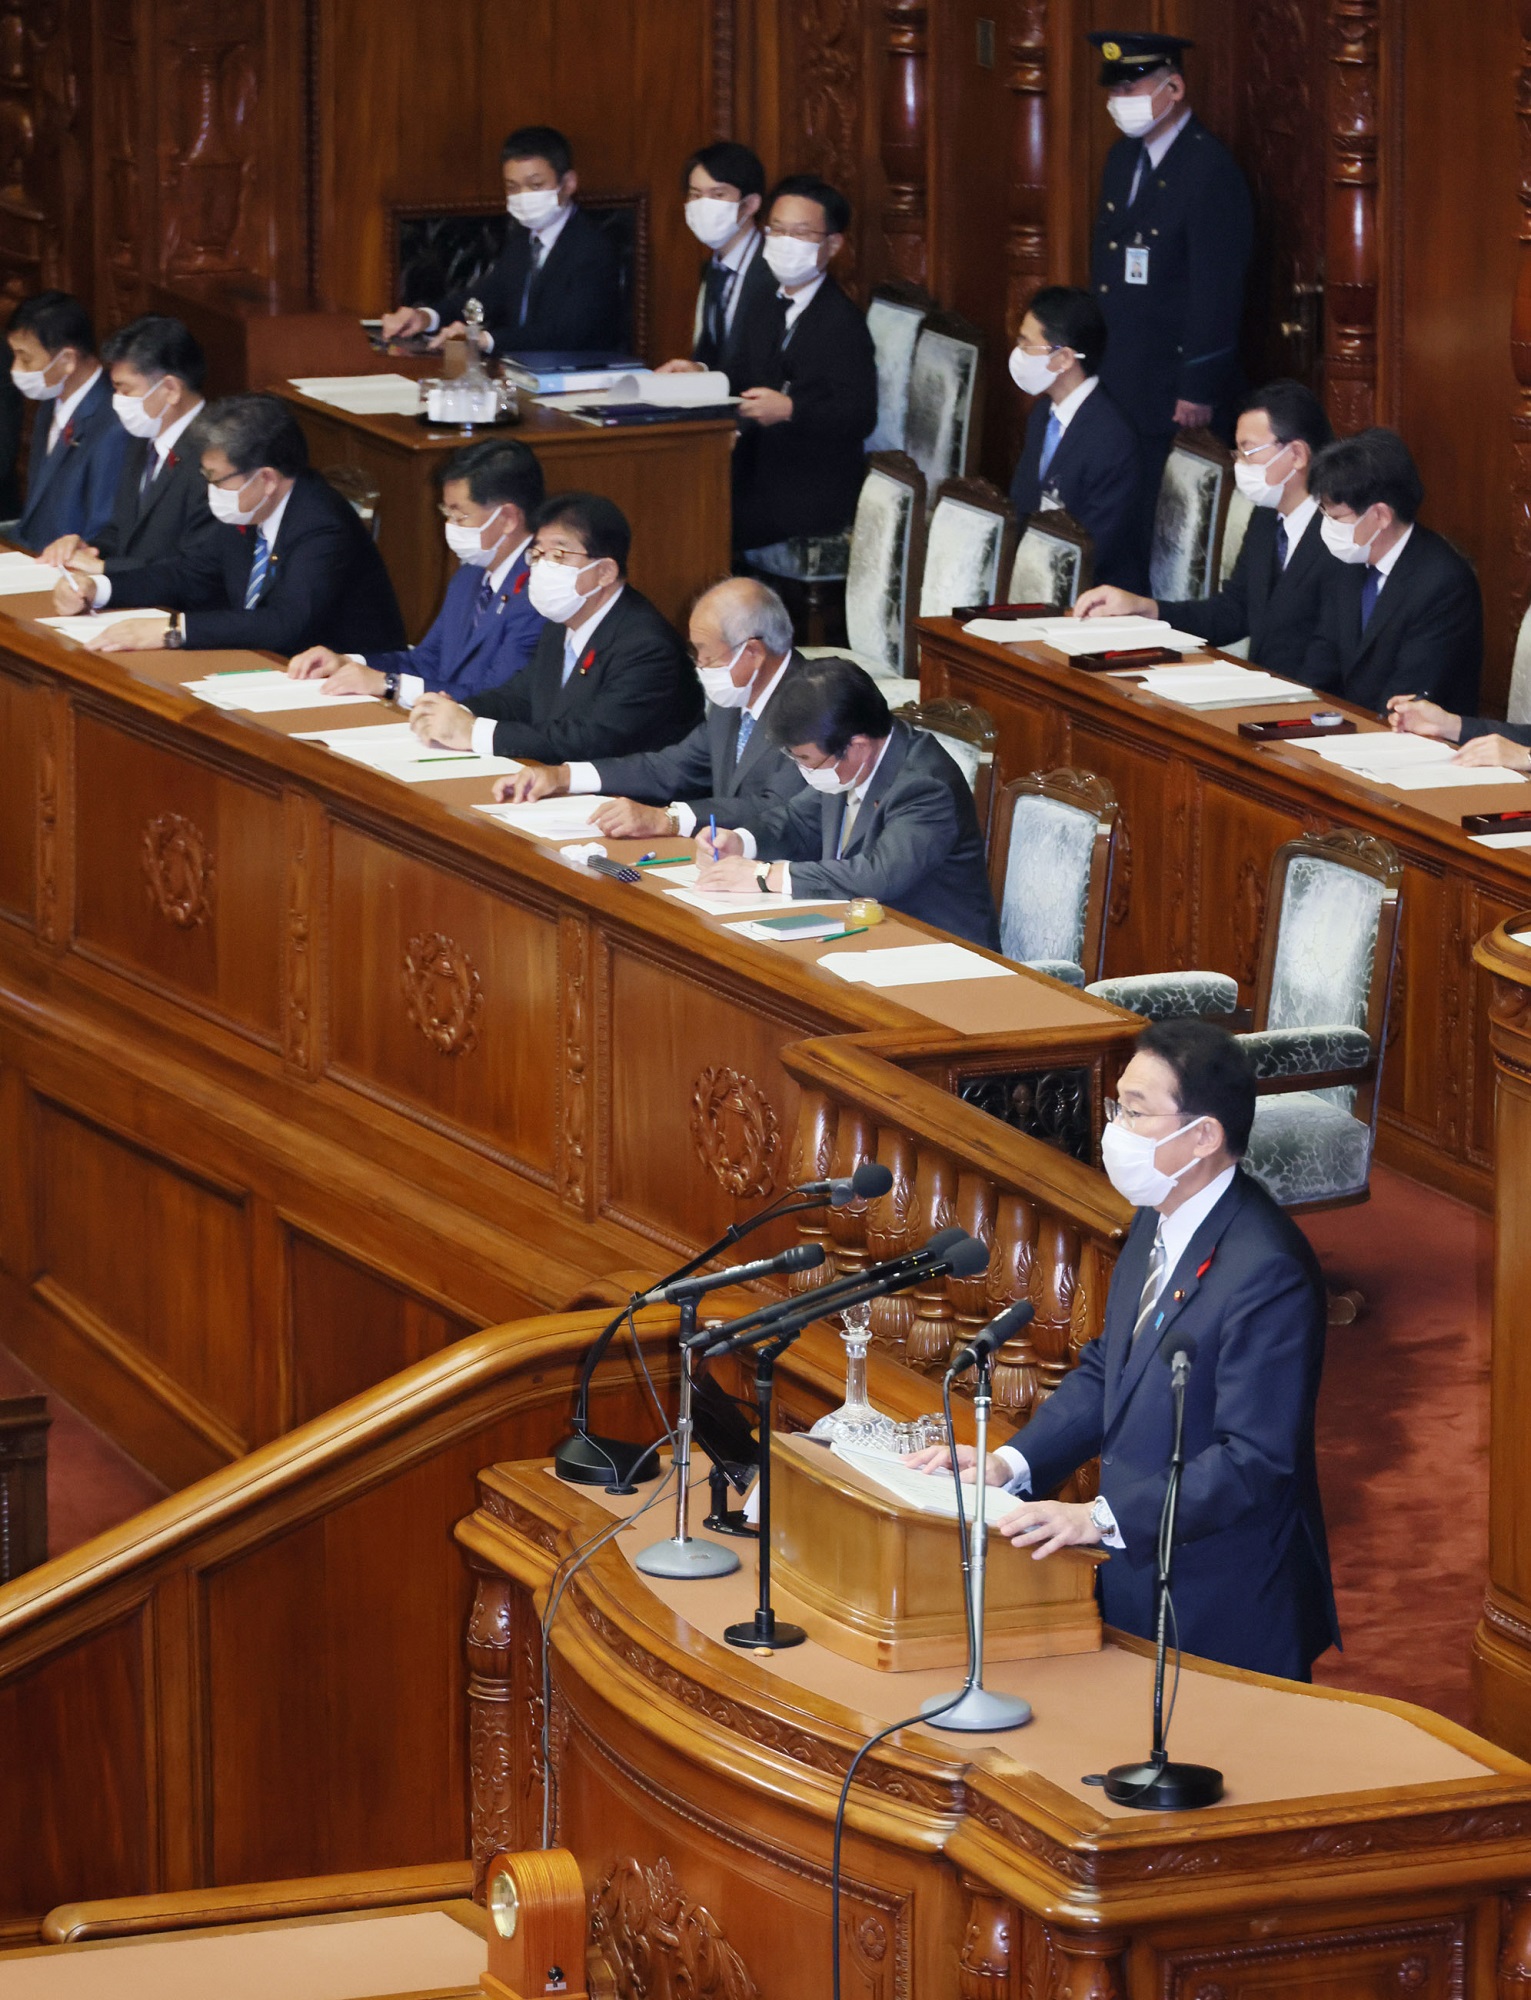 Photograph of the Prime Minister delivering a policy speech during a plenary session of the House of Representatives (3)